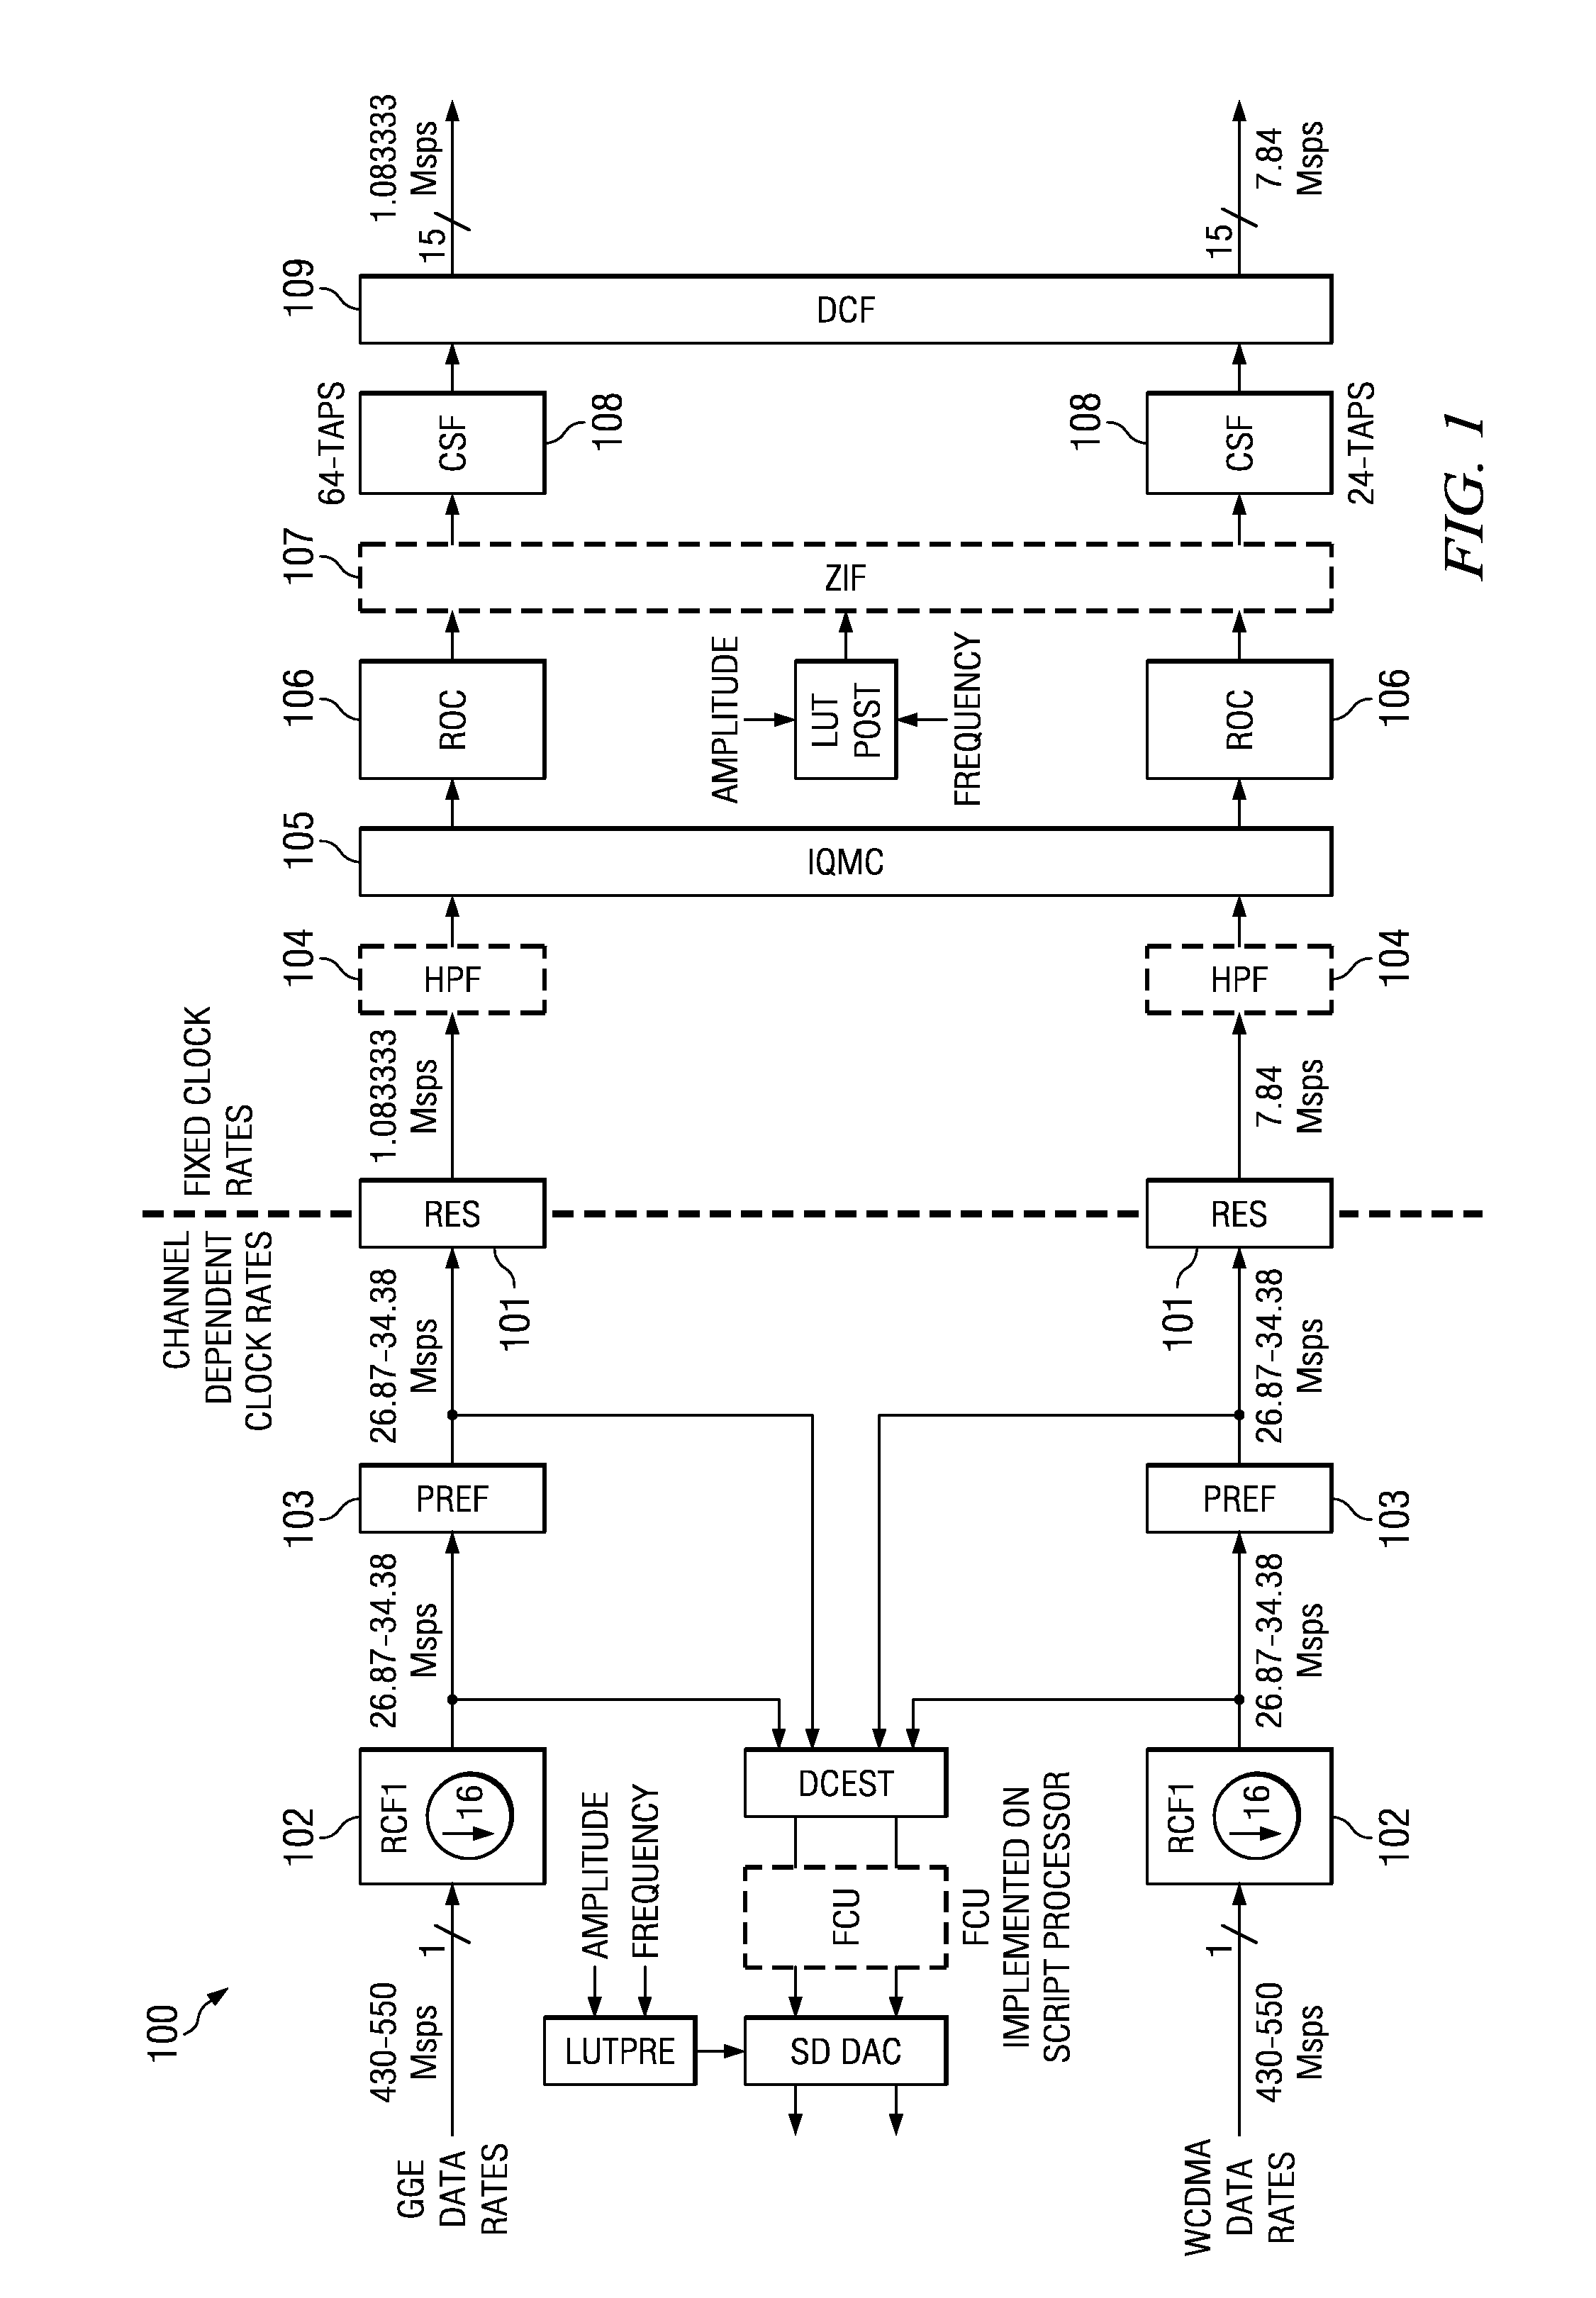 Application Specific Instruction Set Processor for Digital Radio Processor Receiving Chain Signal Processing